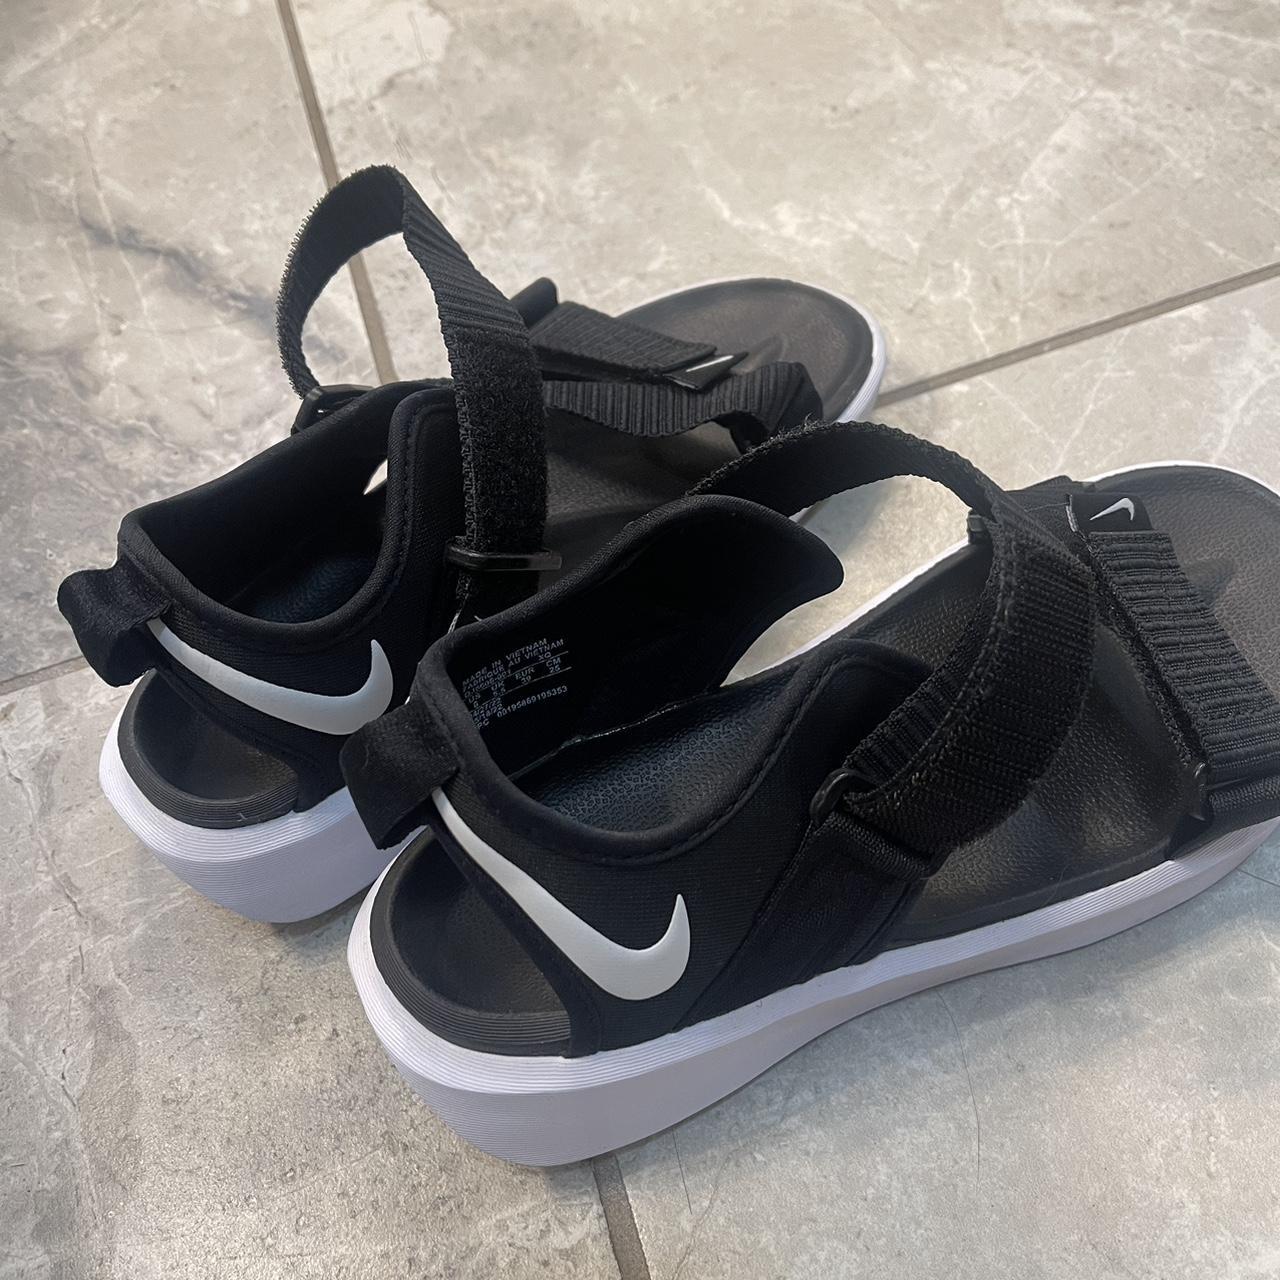 women’s nike sandals , size 8, worn once